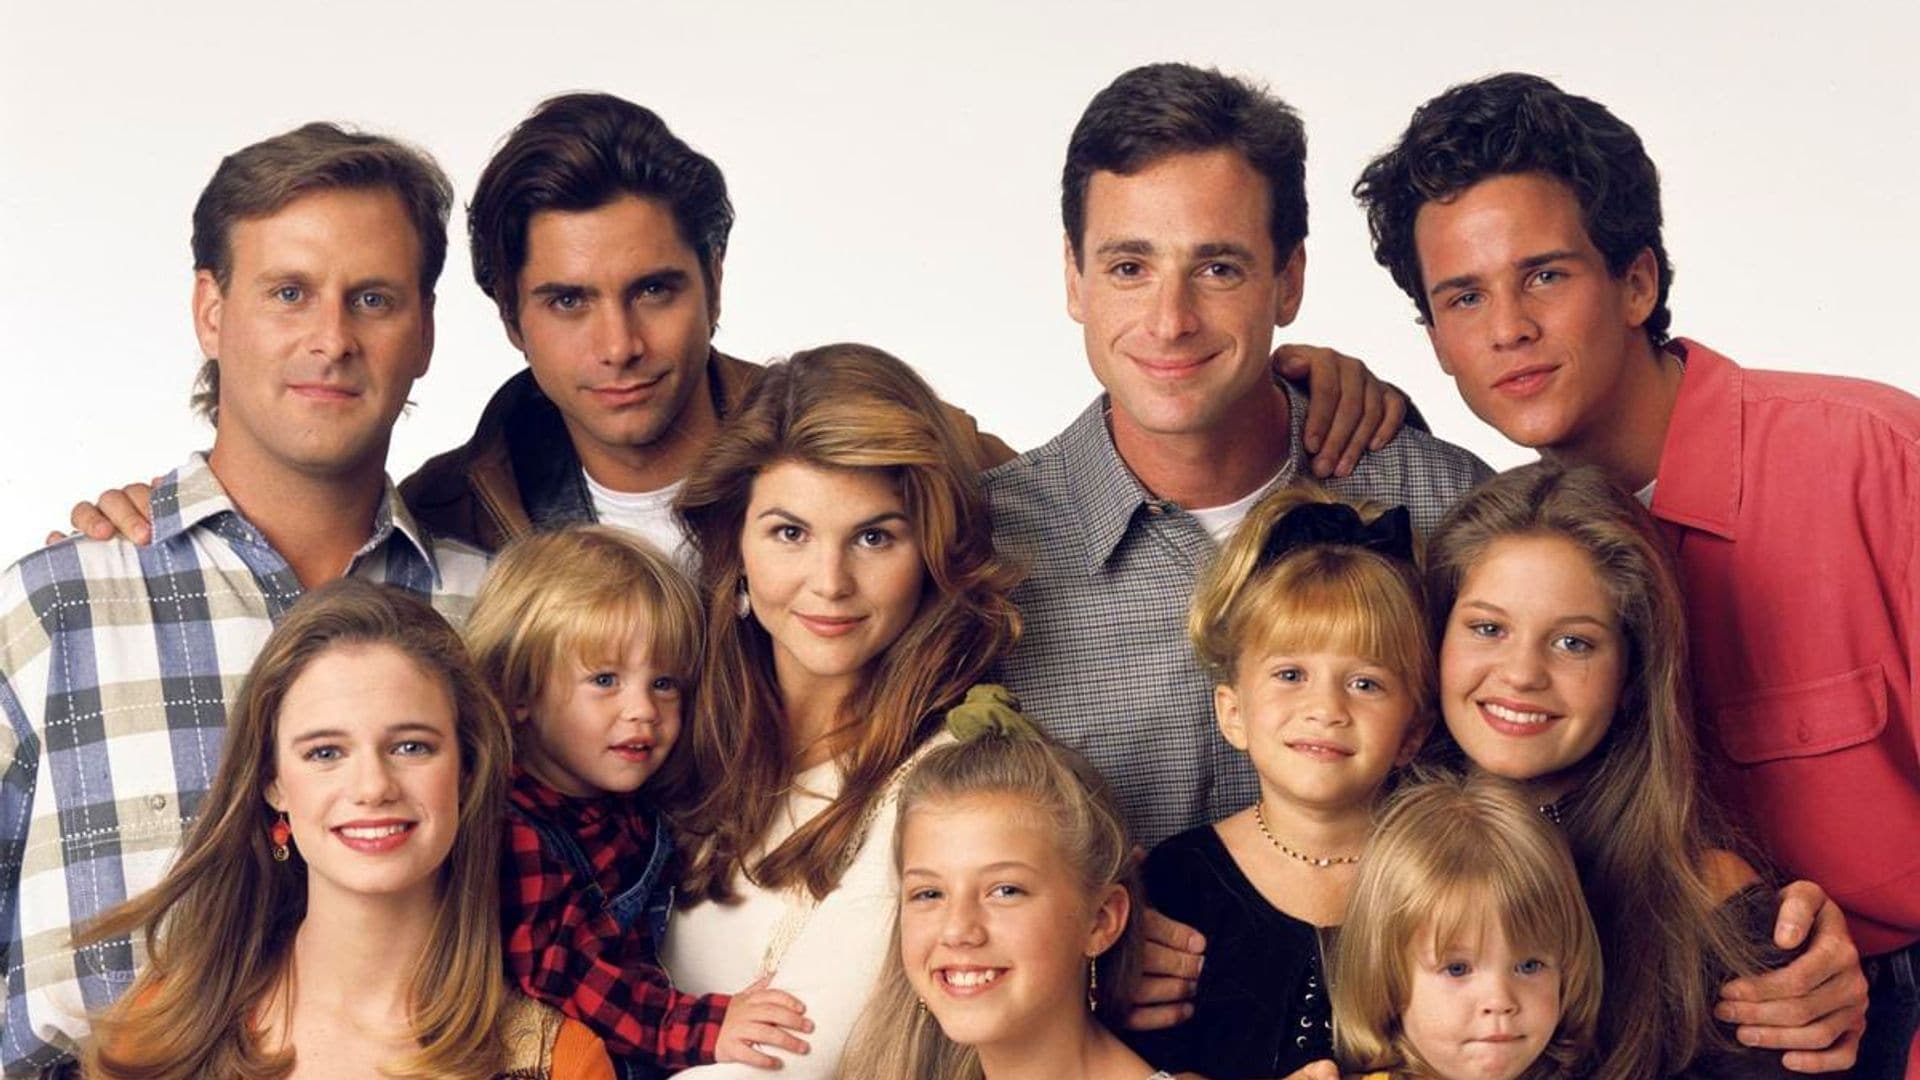 John Stamos’ son Billy is ‘obsessed’ with ‘Full House’: ‘I blame Bob’